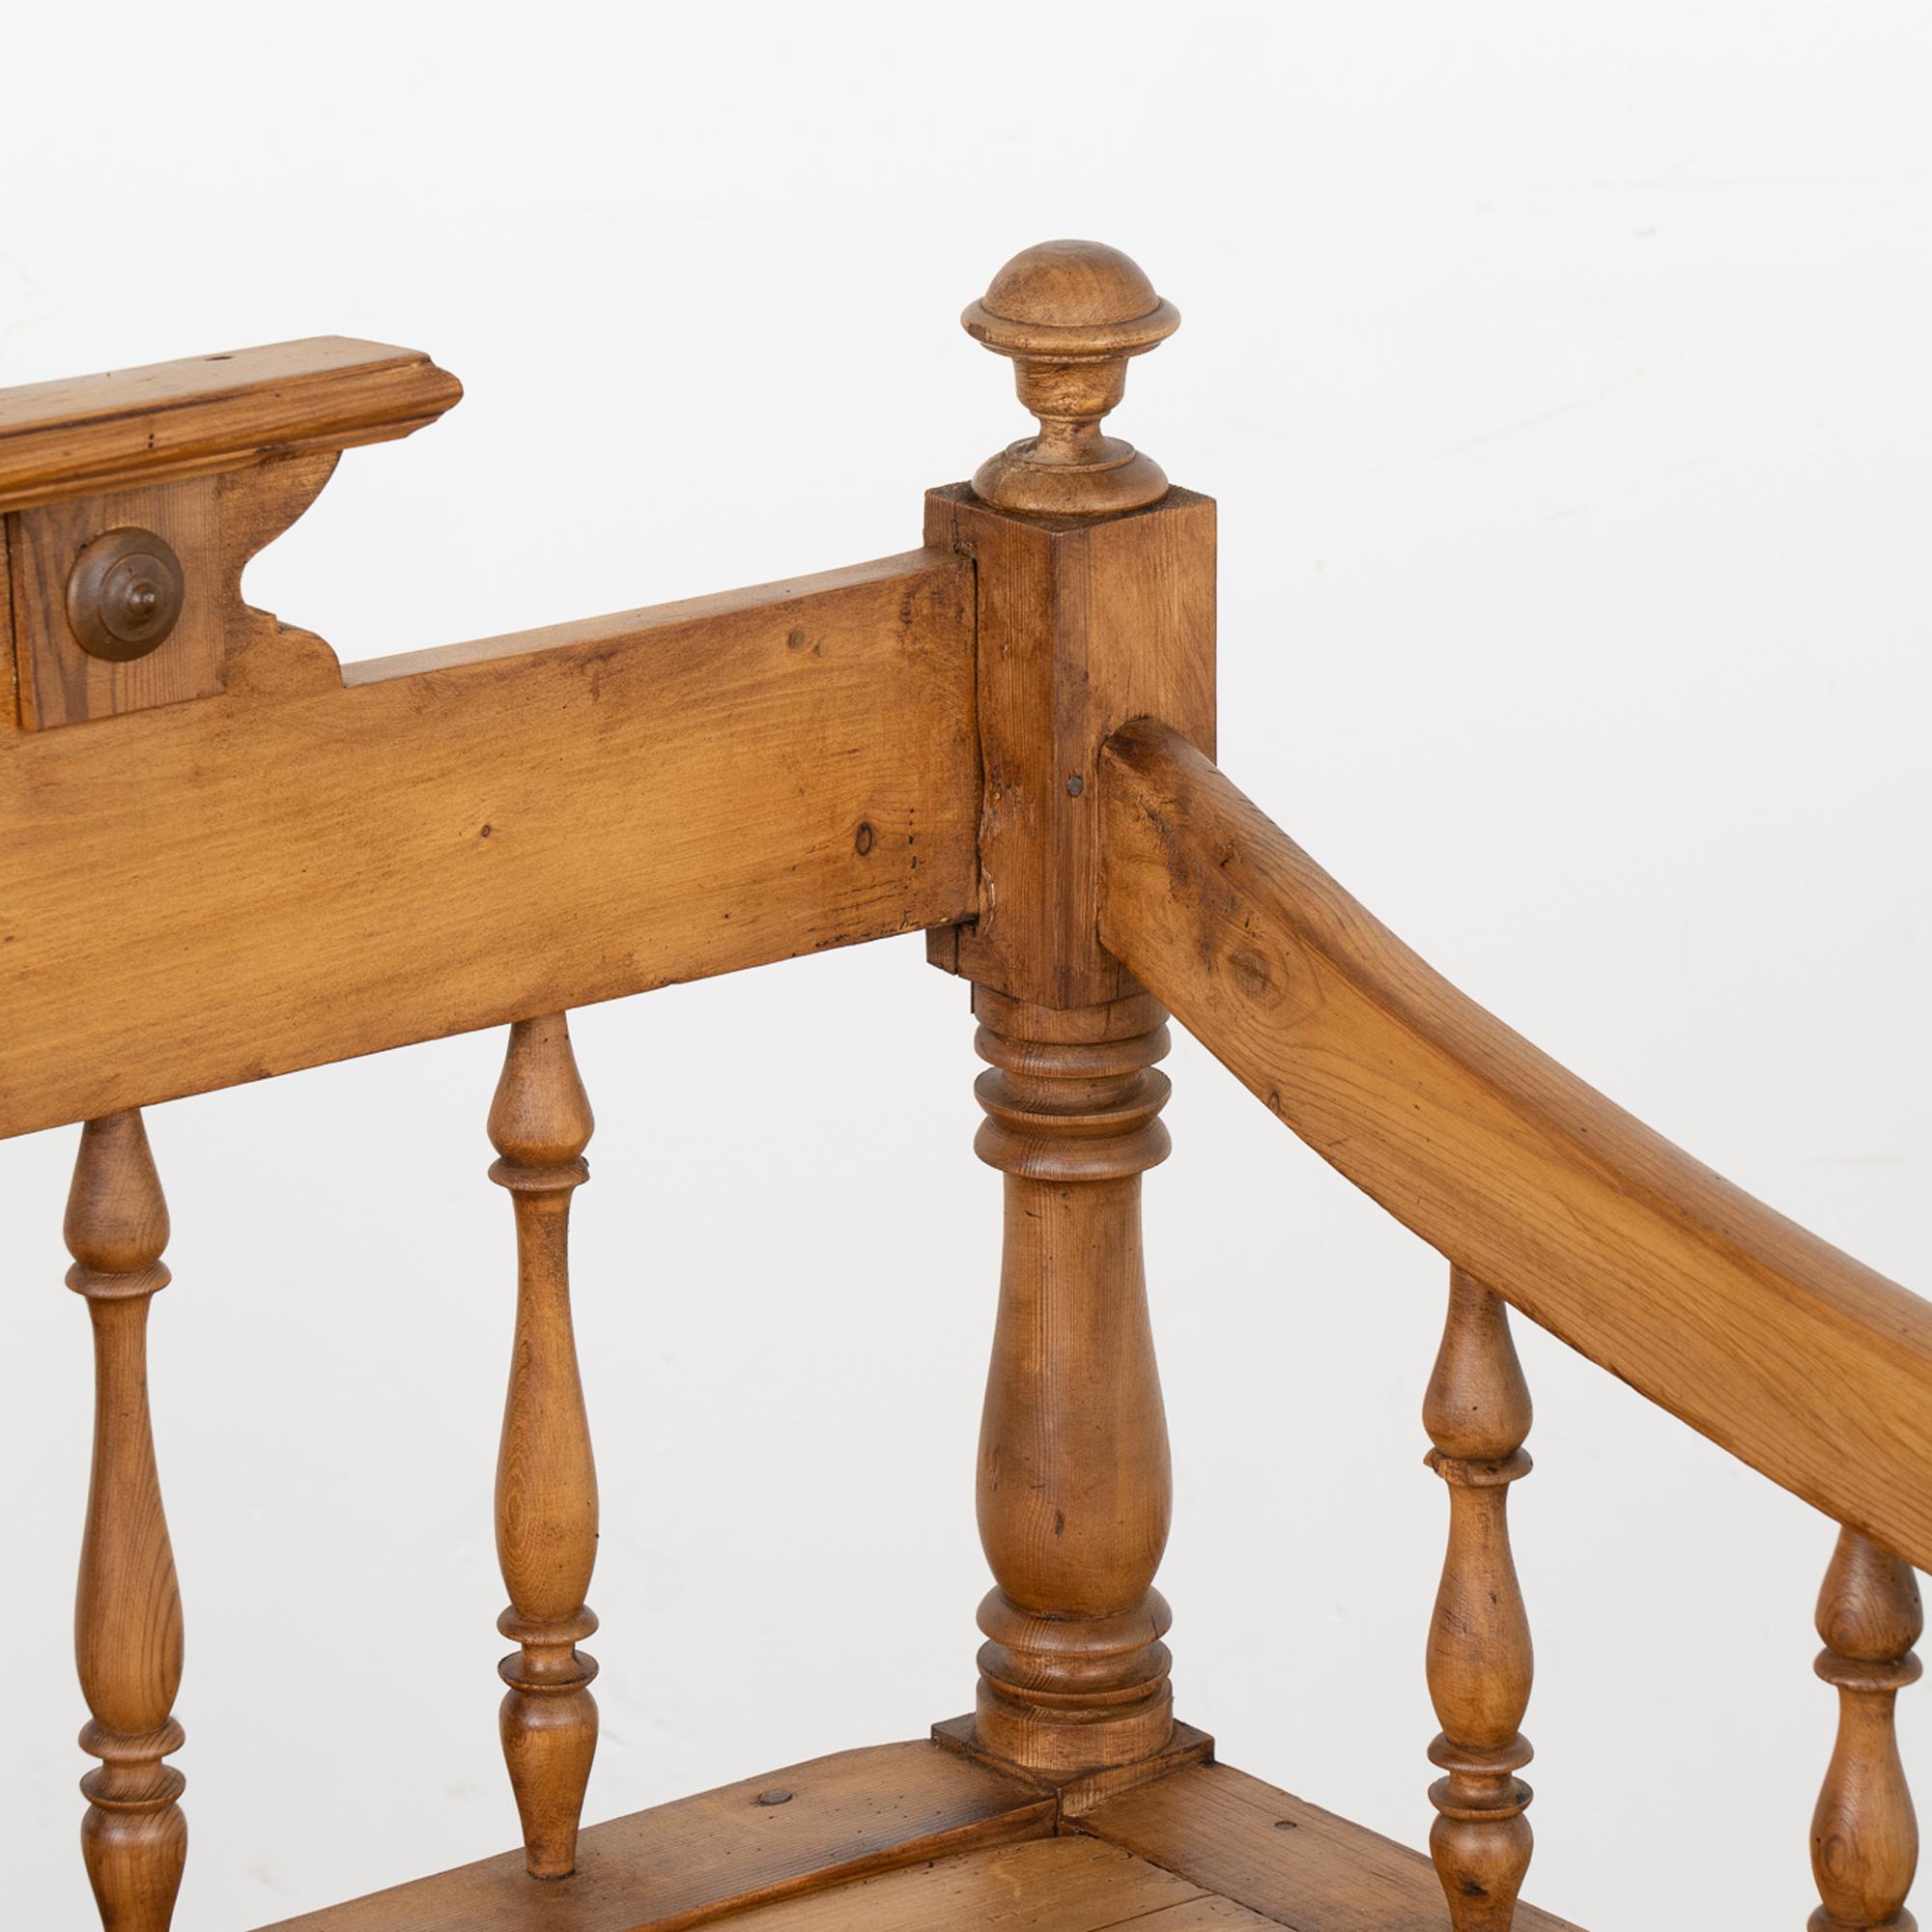 19th Century Small Pine Bench With Storage, Sweden Circa 1840-60